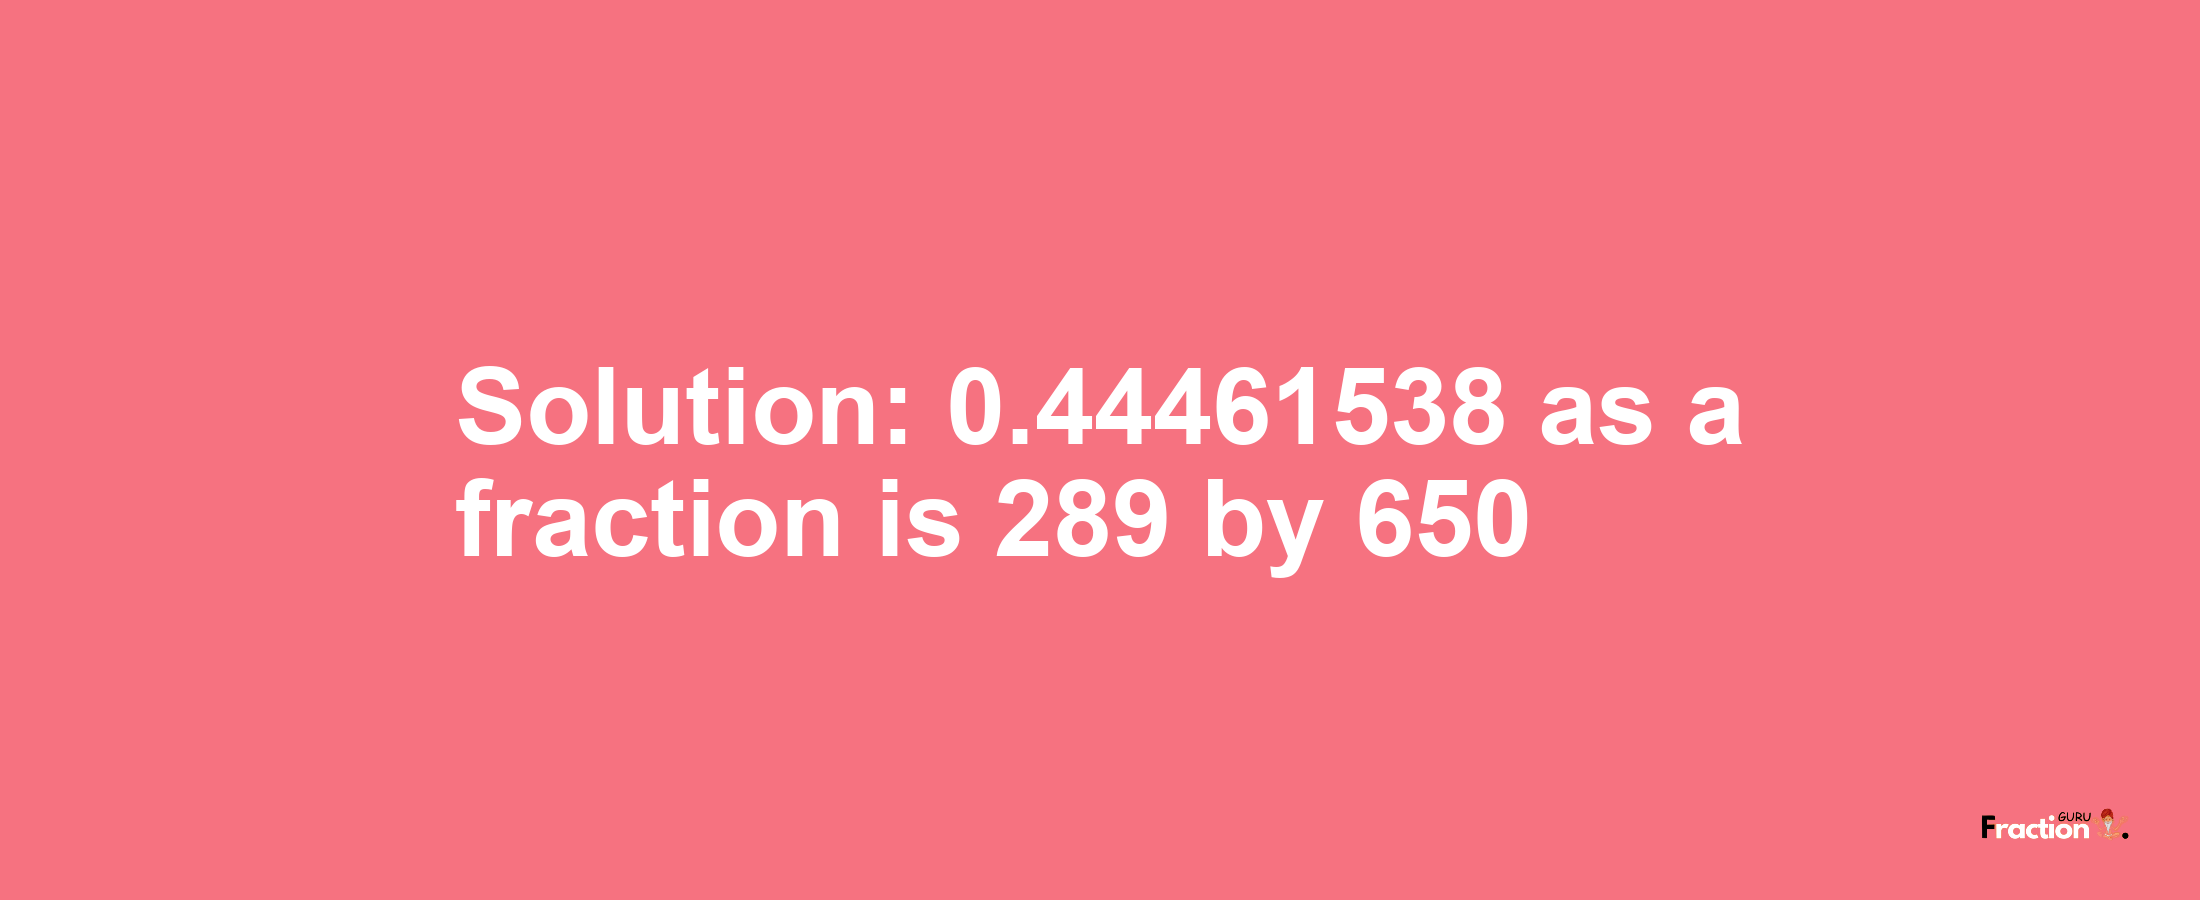 Solution:0.44461538 as a fraction is 289/650